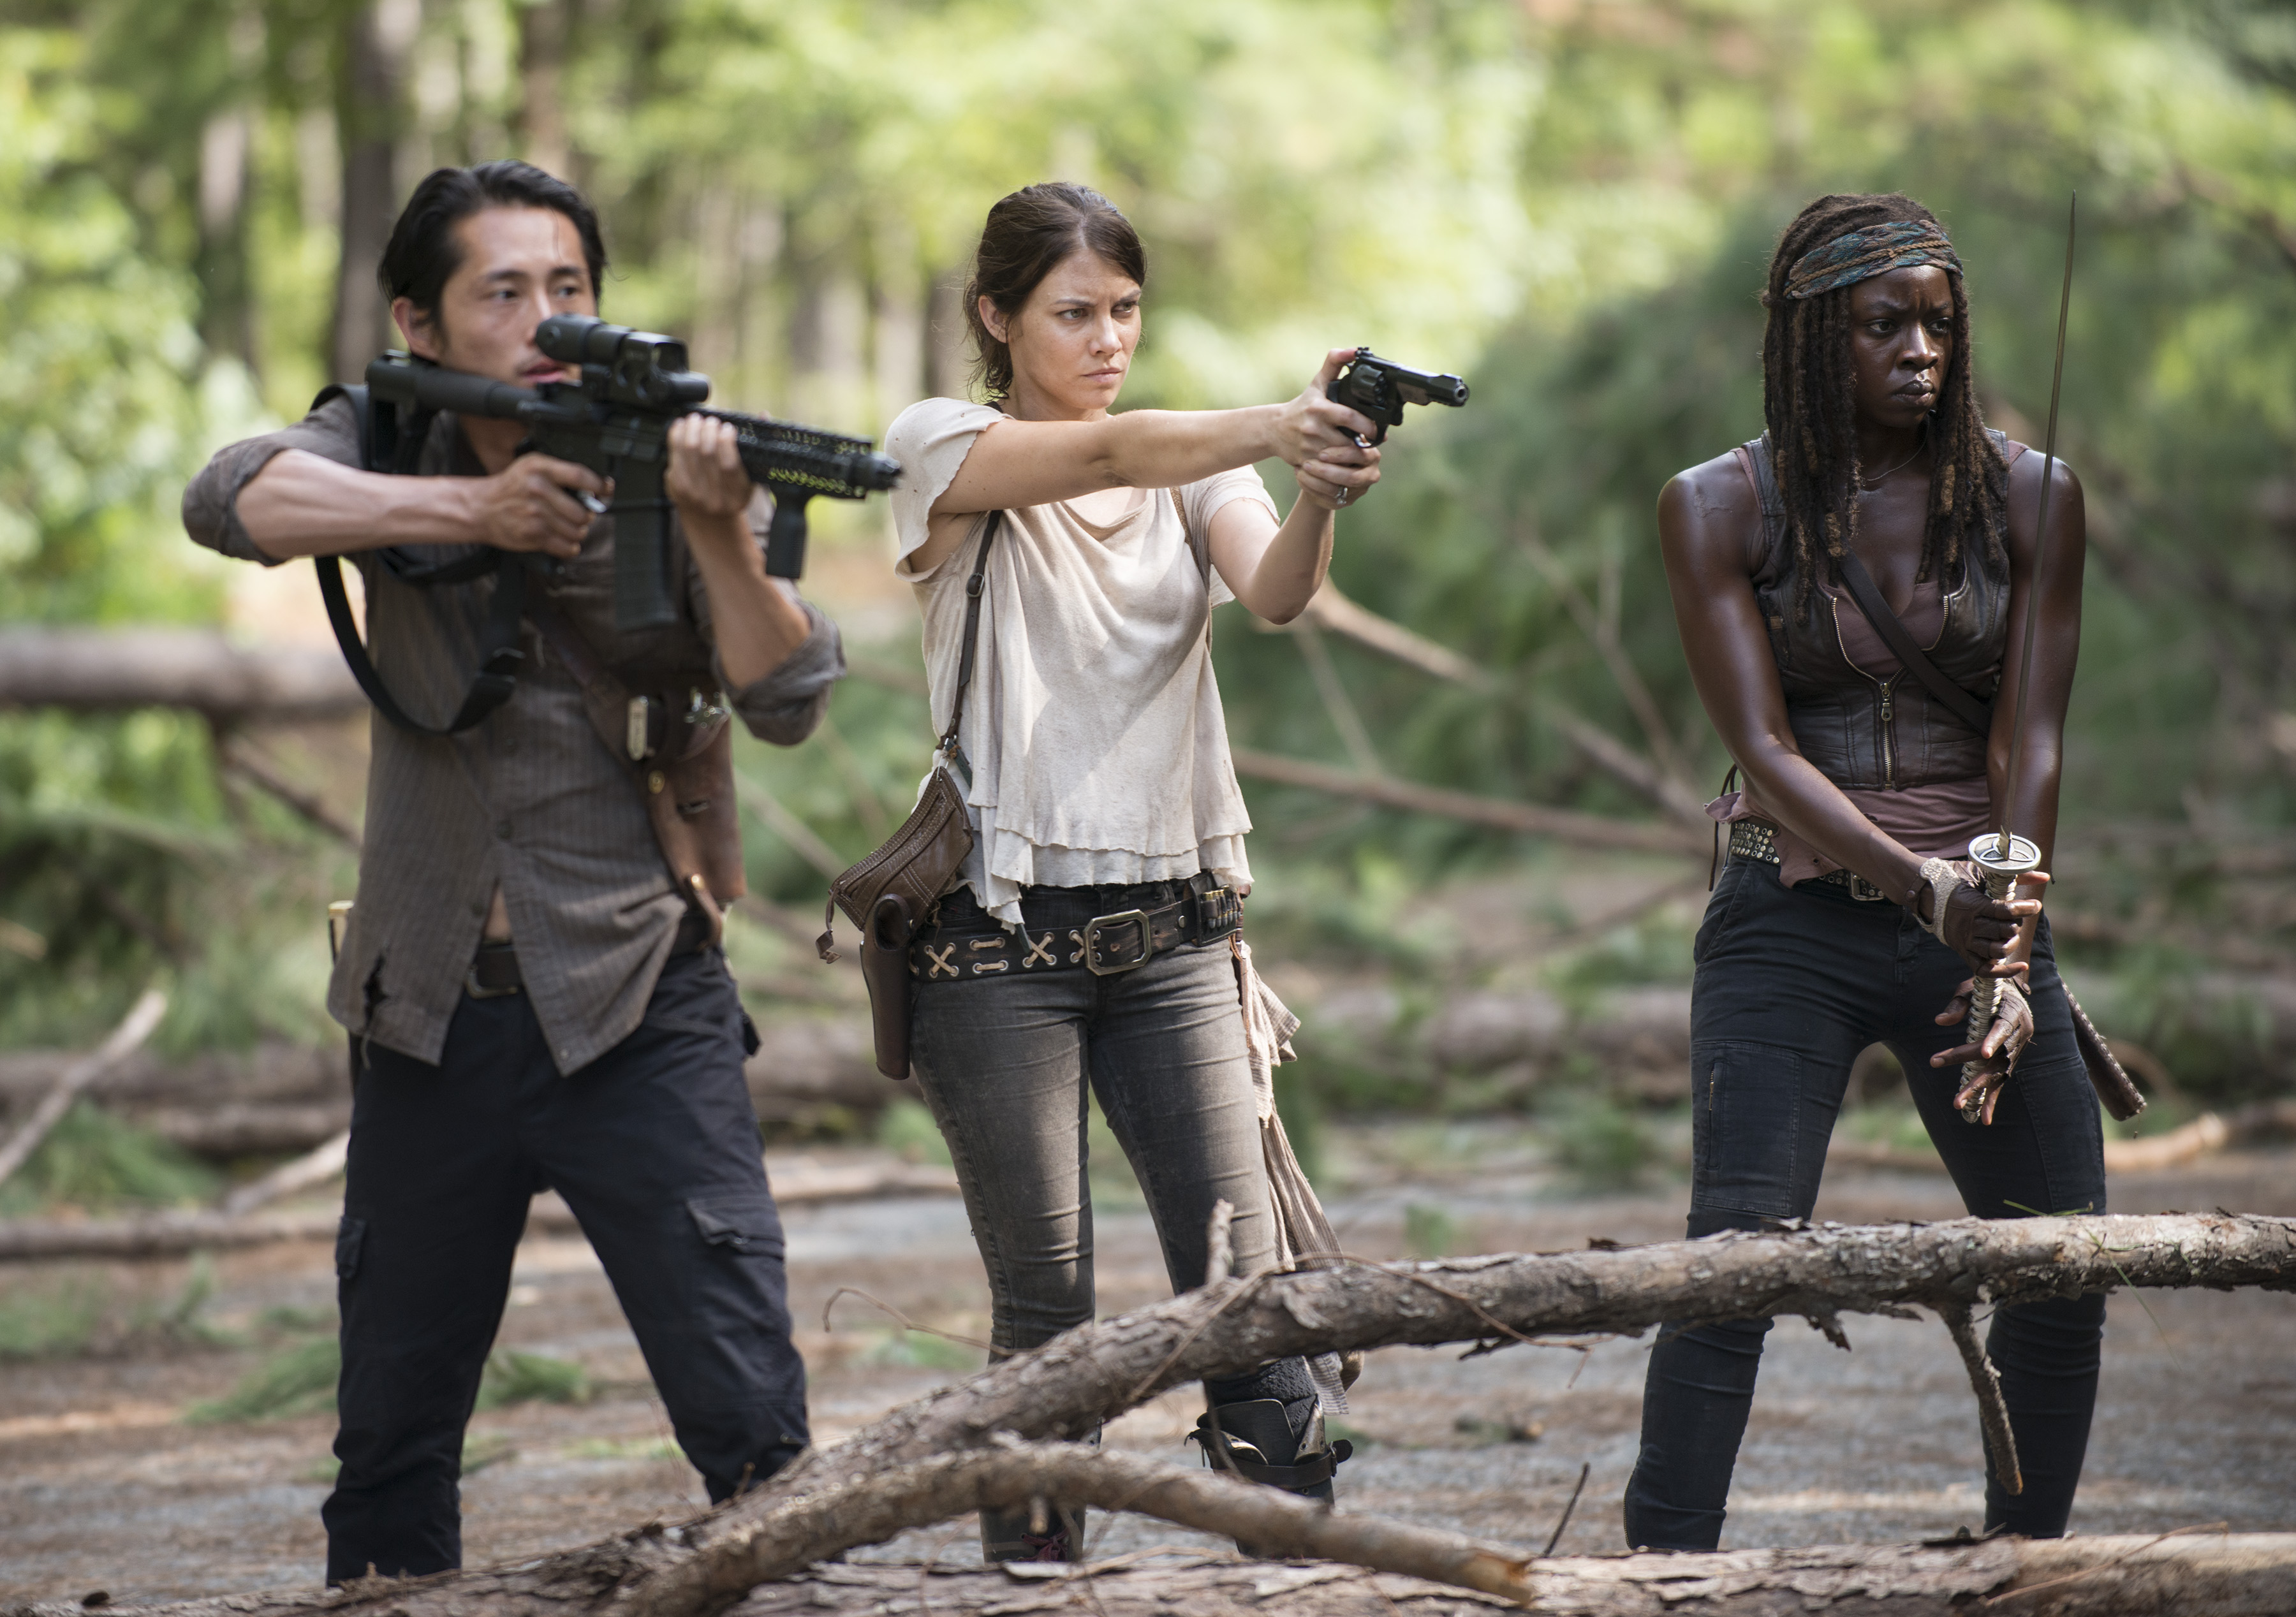 The Walking Dead Season 5 Episode 11 The Distance Looking Images, Photos, Reviews